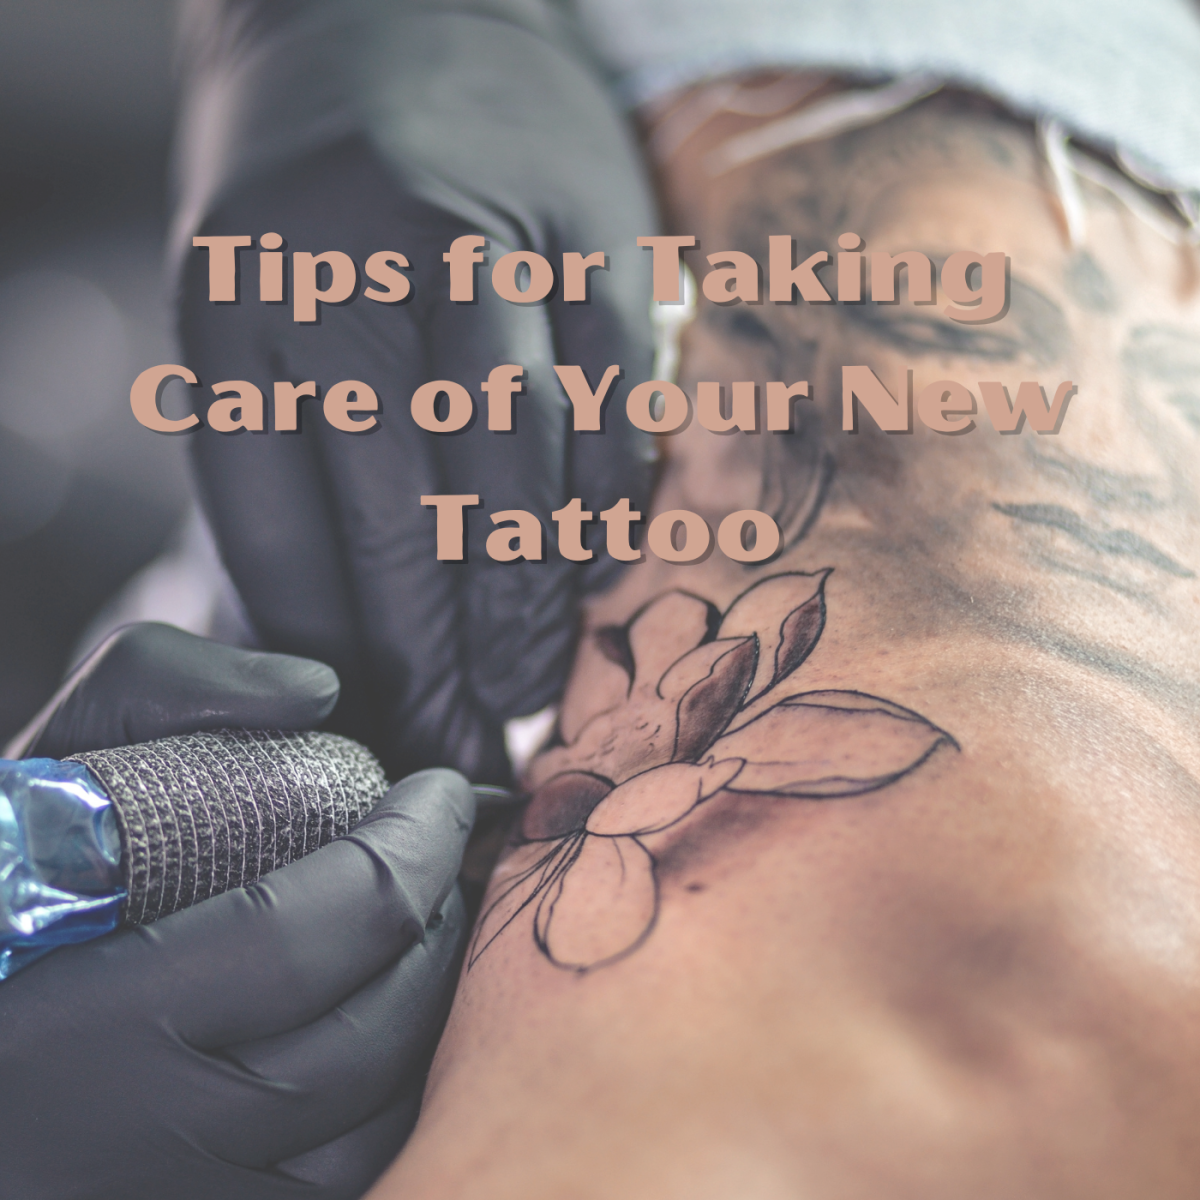 Here's what you need to know for taking care of your new tattoo. 